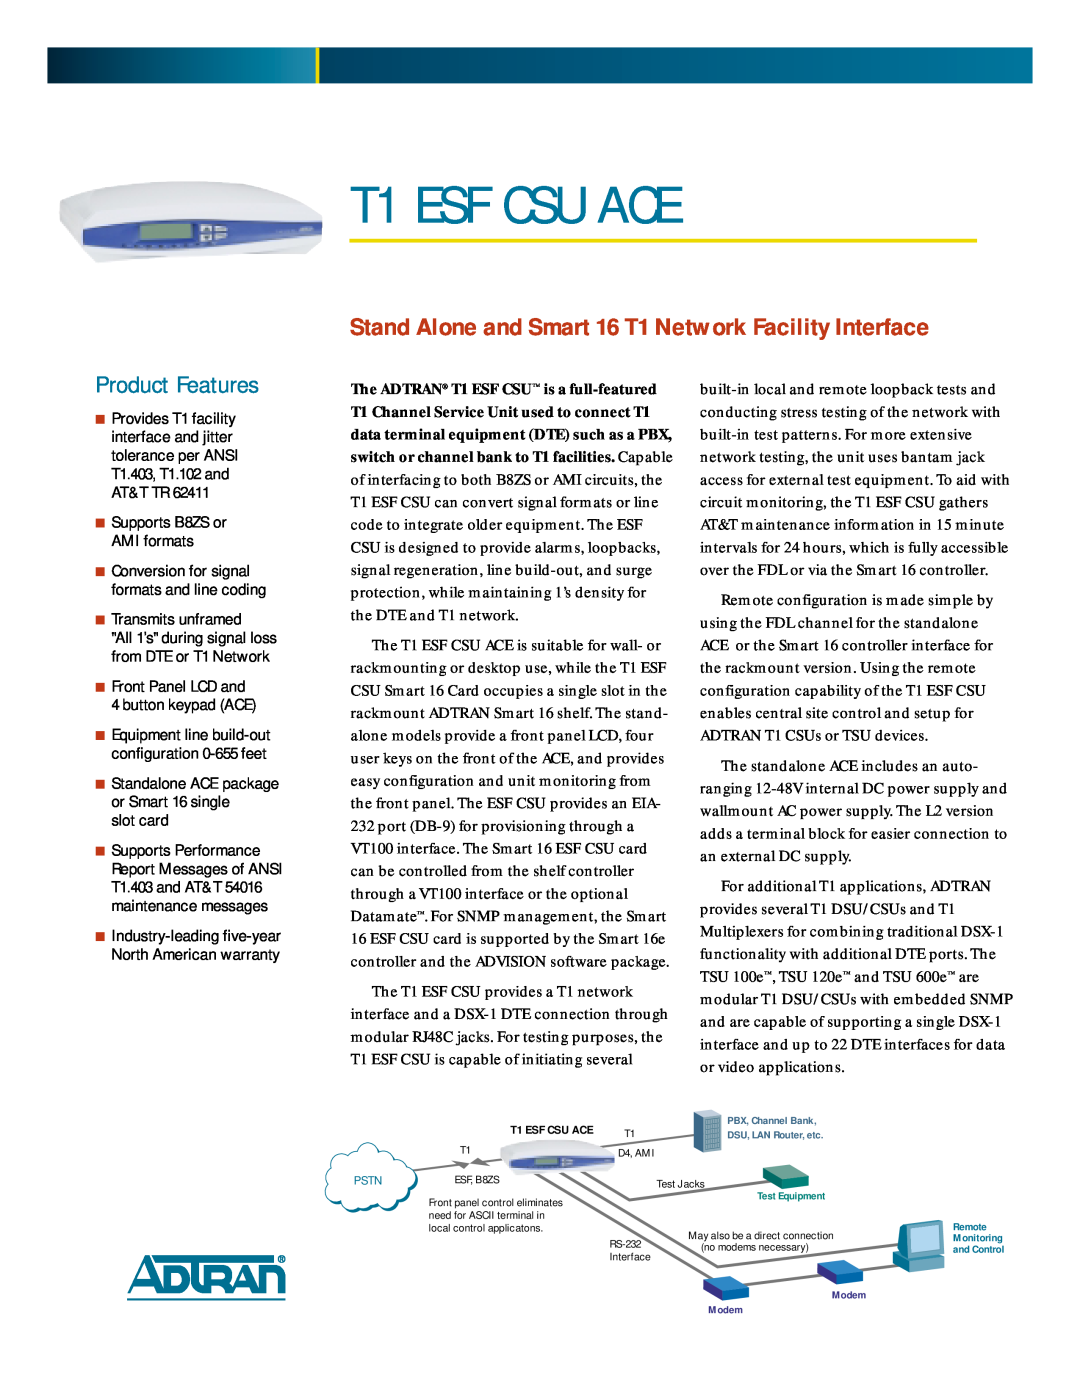 ADTRAN B8ZS warranty T1 ESF CSU ACE, Product Features, Stand Alone and Smart 16 T1 Network Facility Interface, Pstn 